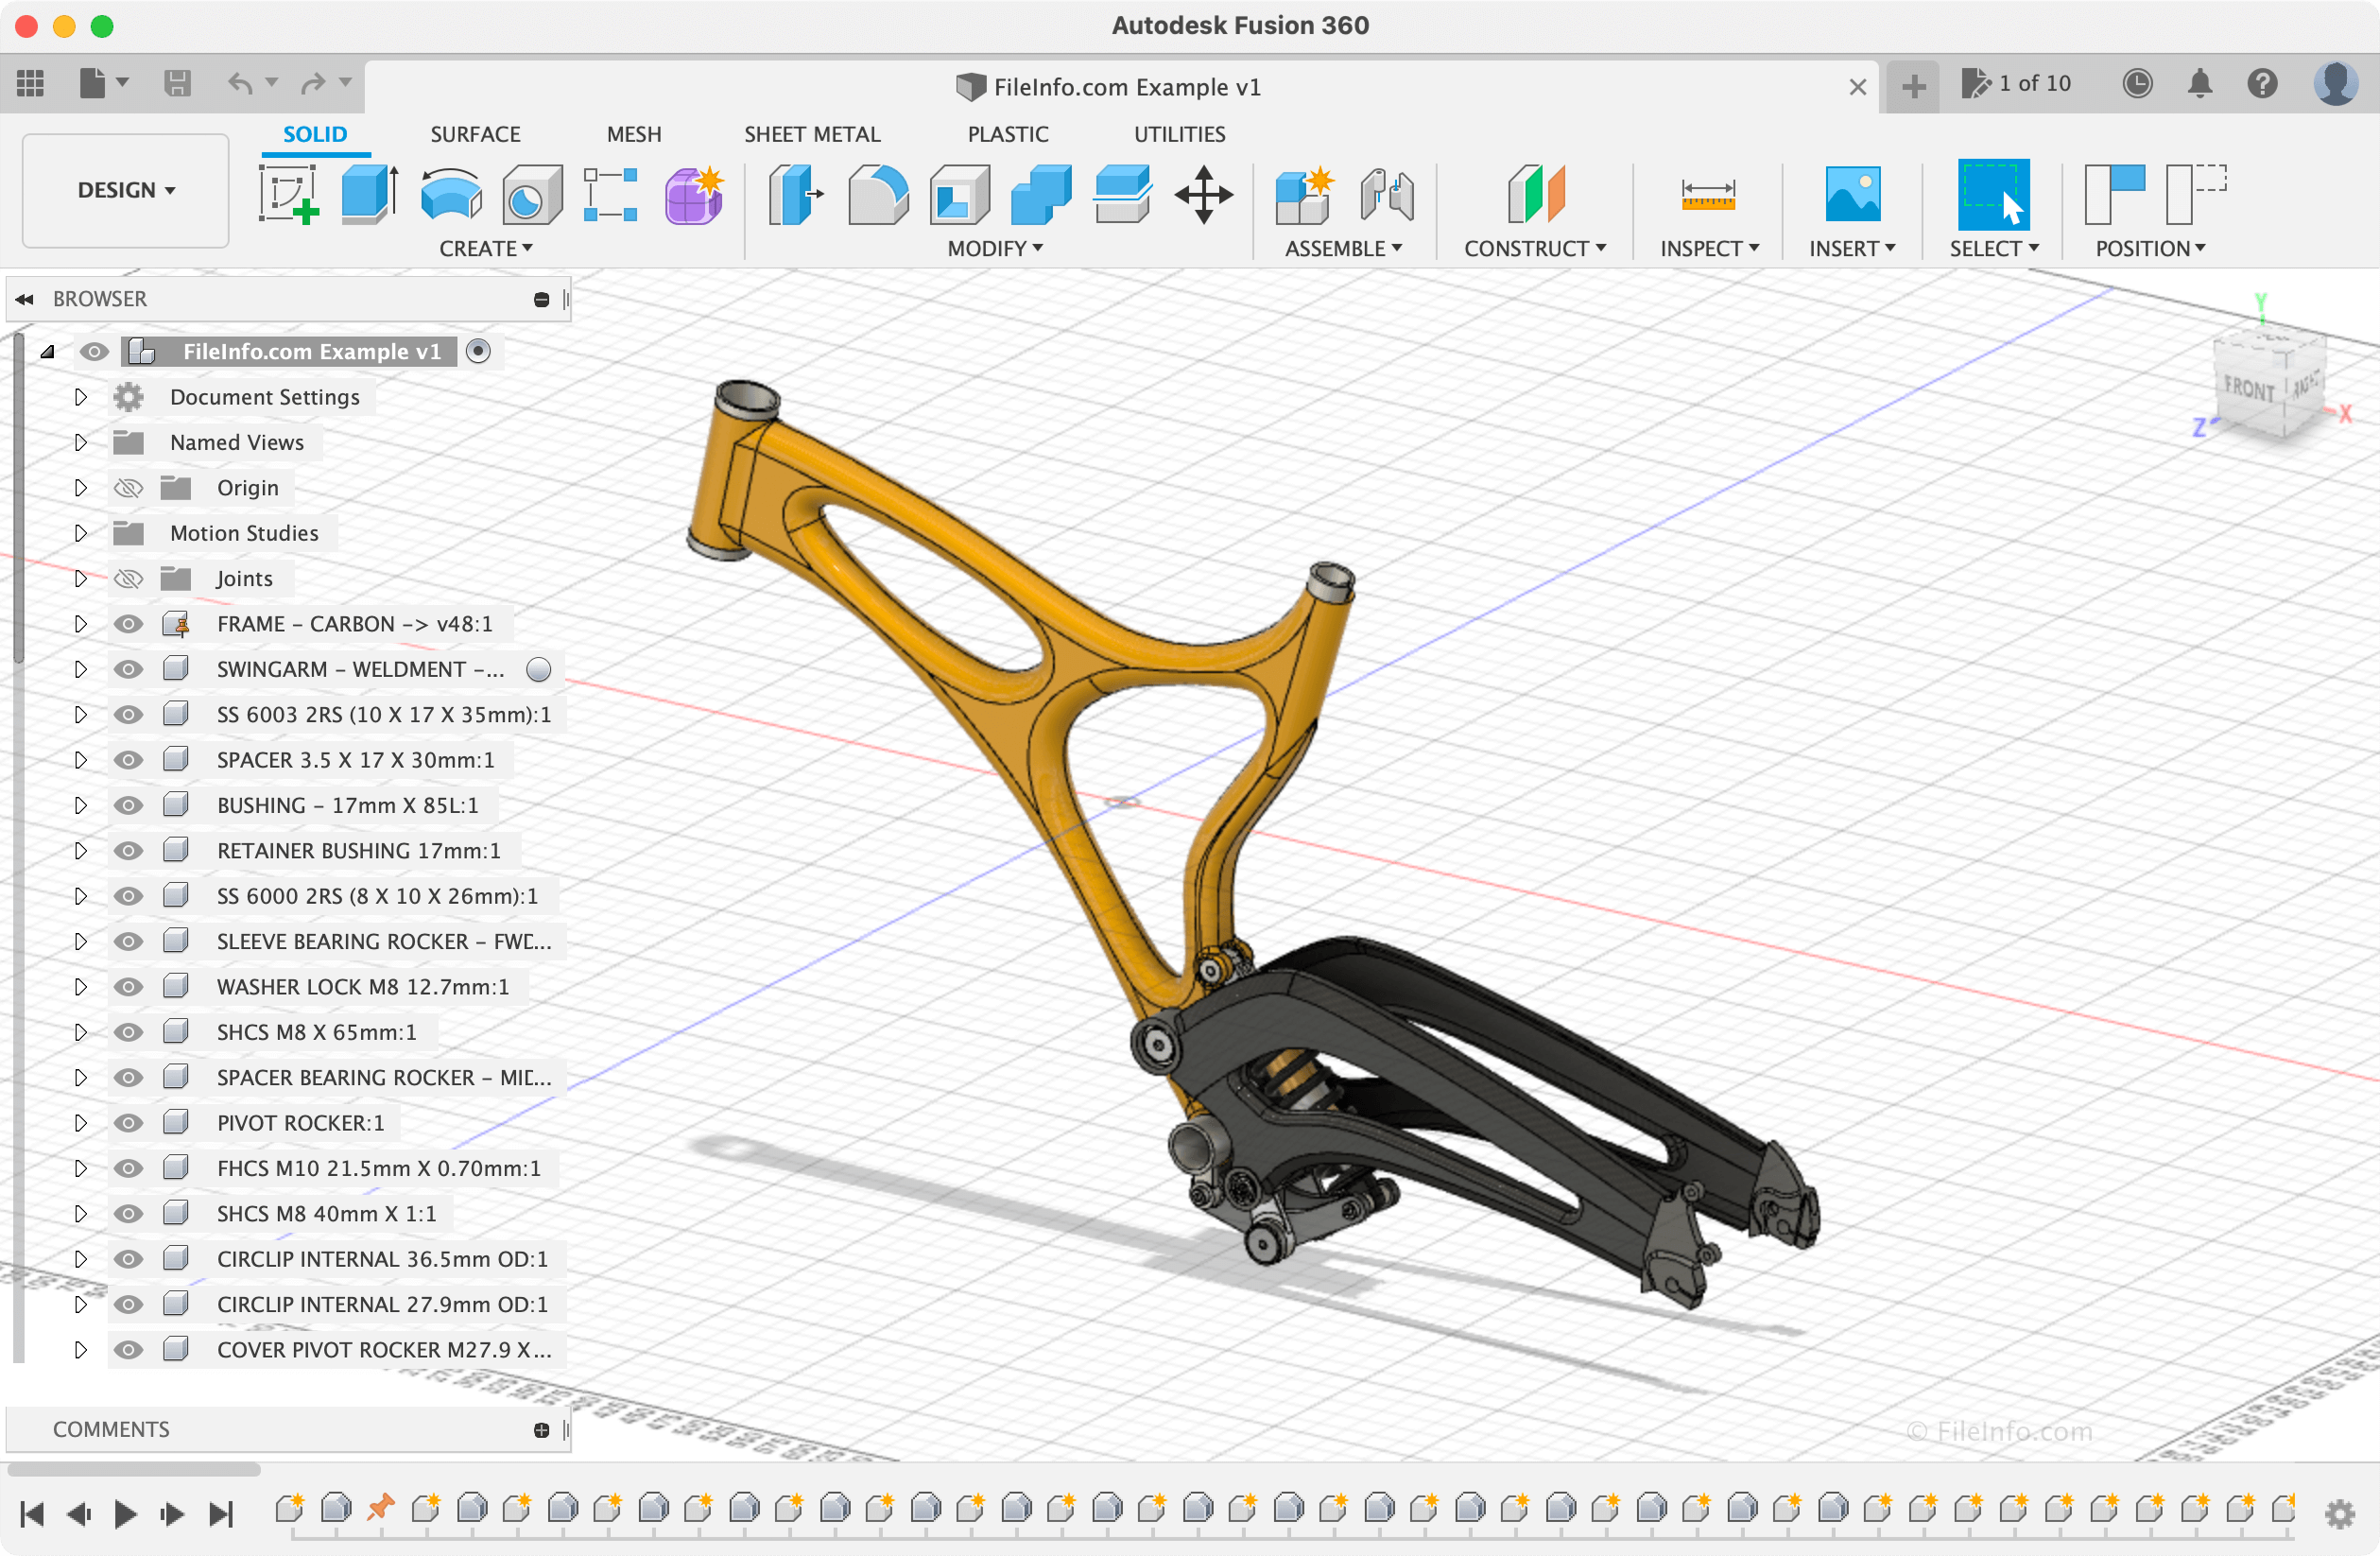 fusion 360 free for personal use